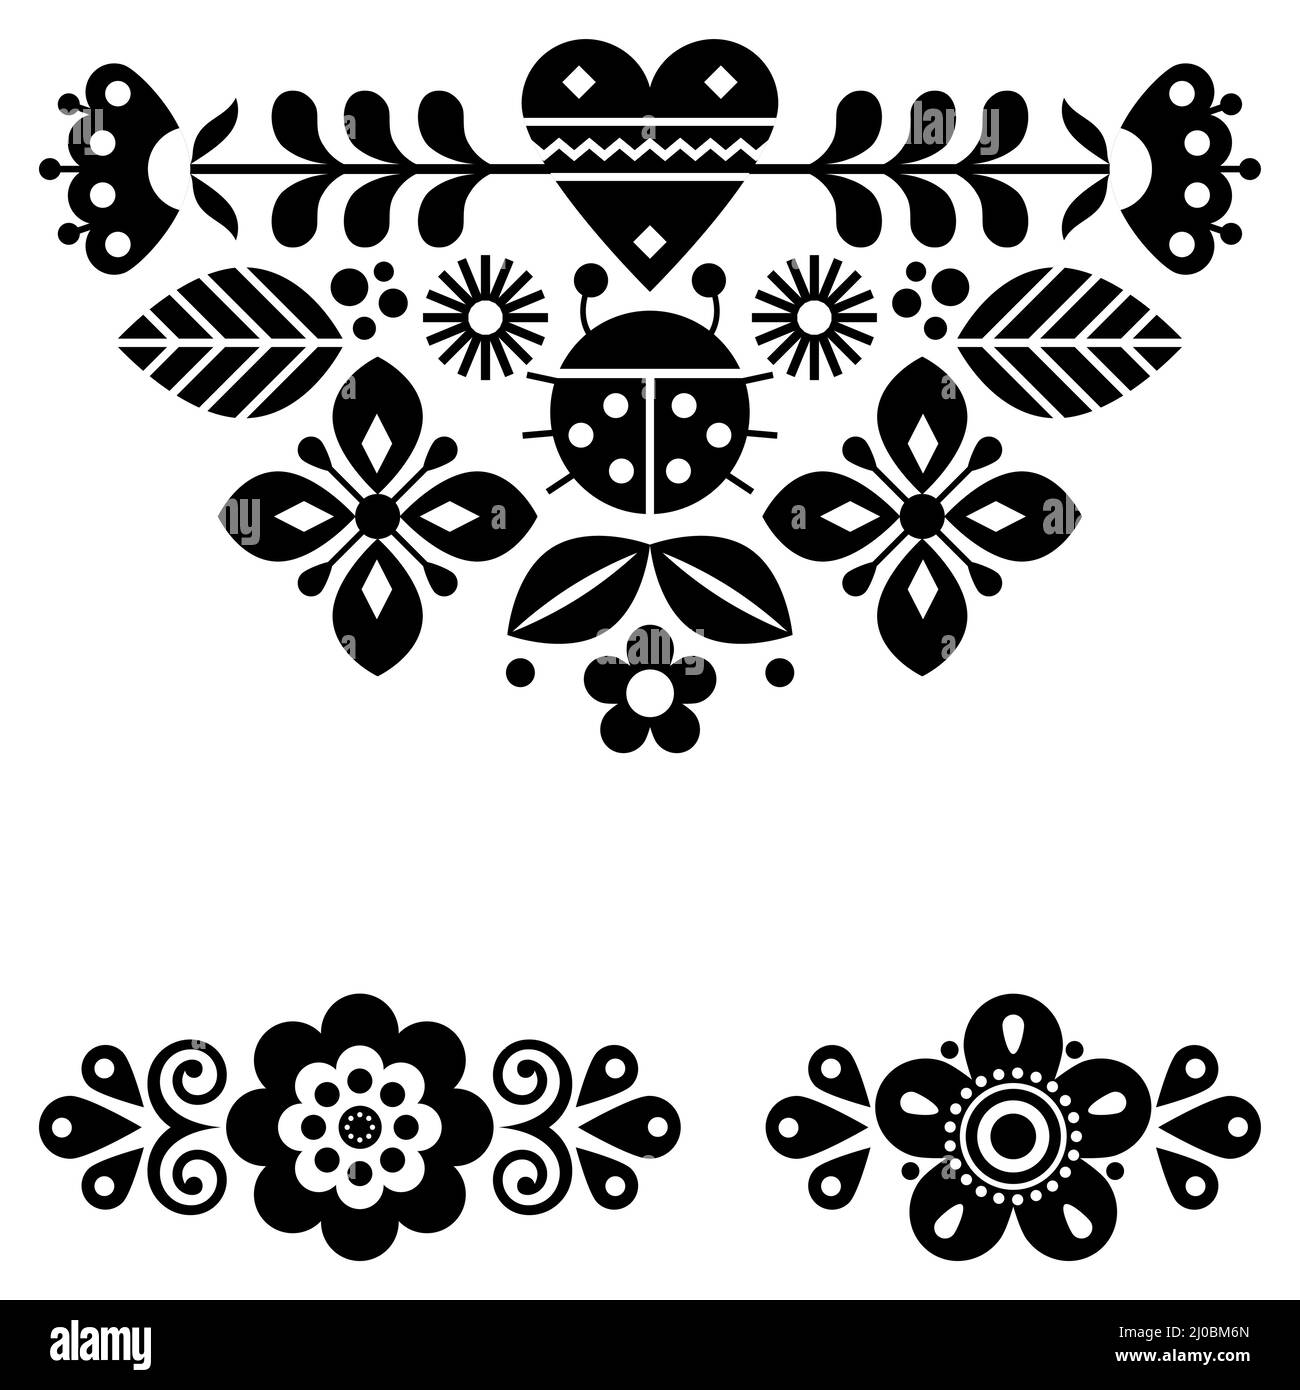 Scandinavian cute folk vector greeting card pattern with ladybird and flowers, black and white spring floral design elements inspired by traditional e Stock Vector